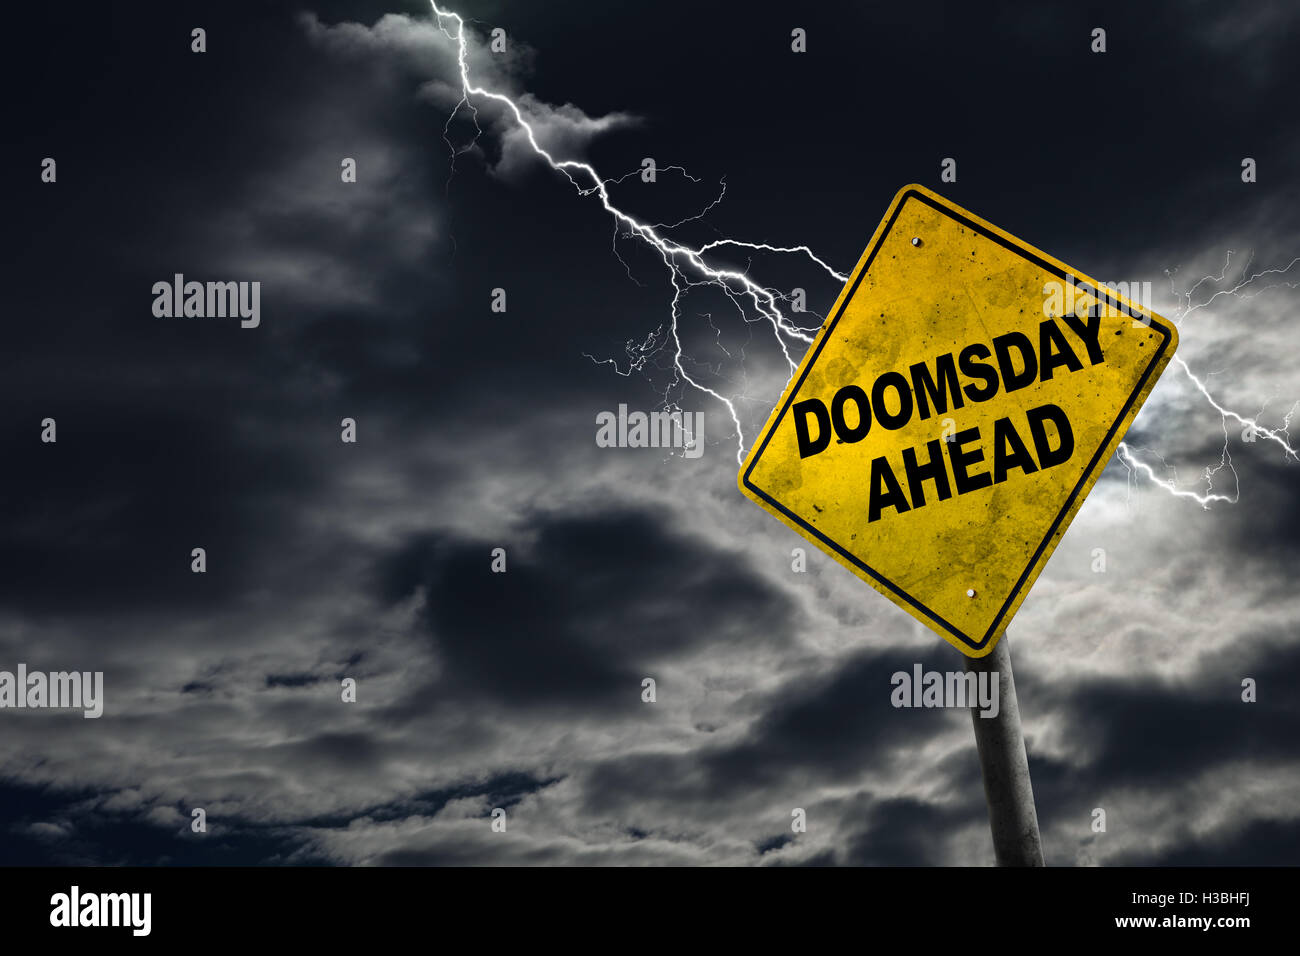 Doomsday sign against a stormy background with lightning and copy space. Dirty and angled sign adds to the drama. Stock Photo